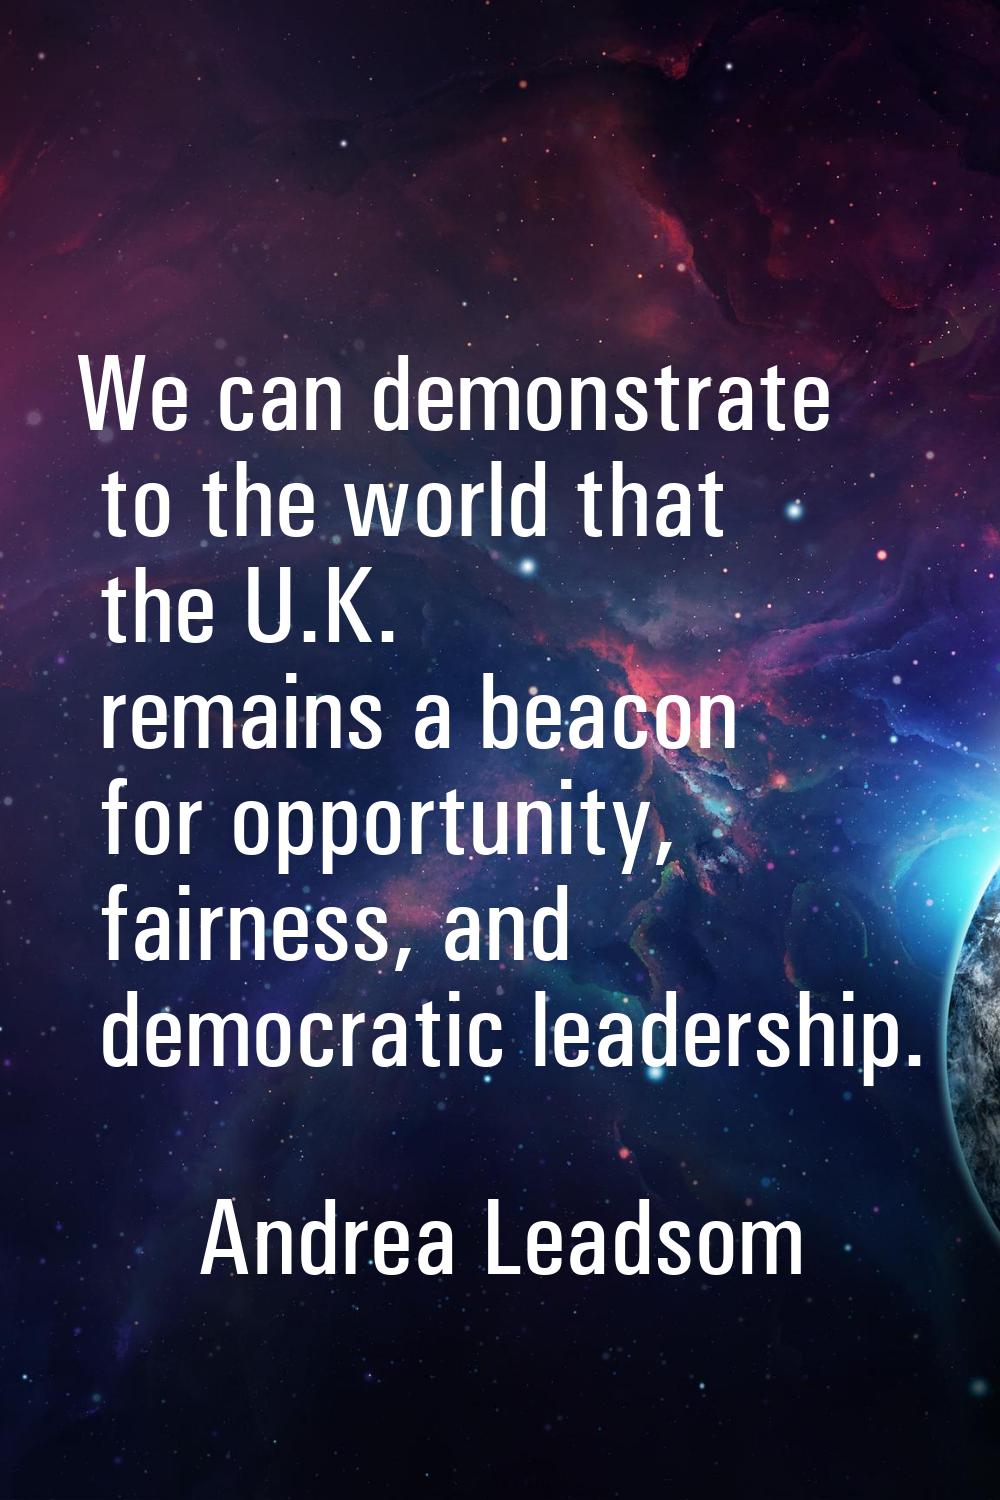 We can demonstrate to the world that the U.K. remains a beacon for opportunity, fairness, and democ